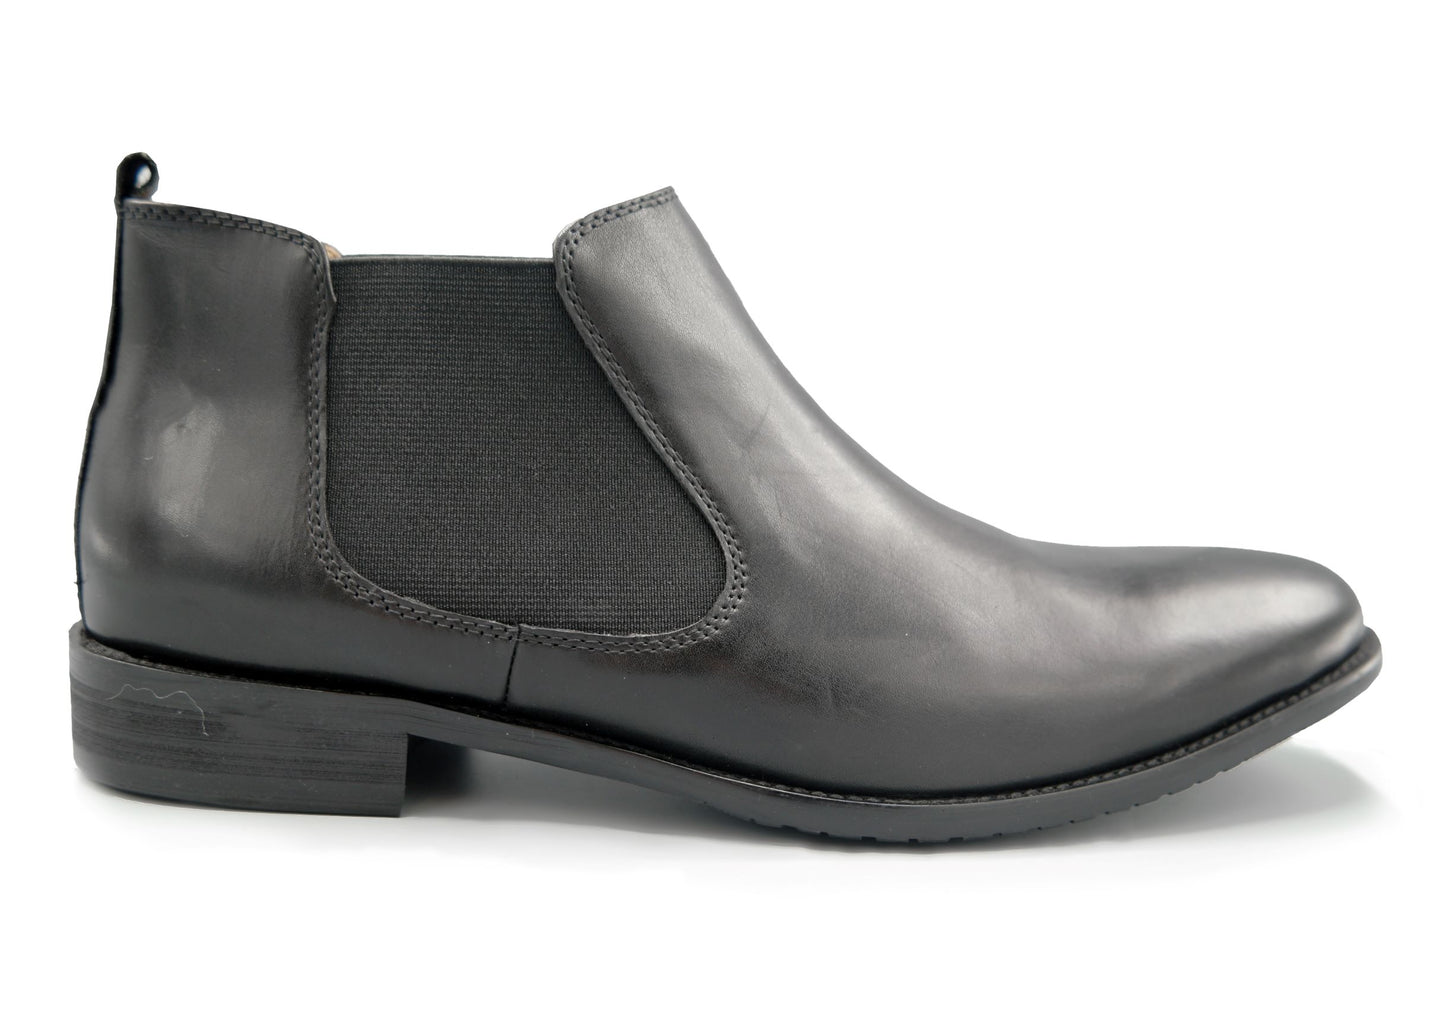 Cutler & Co - Anthony Boot